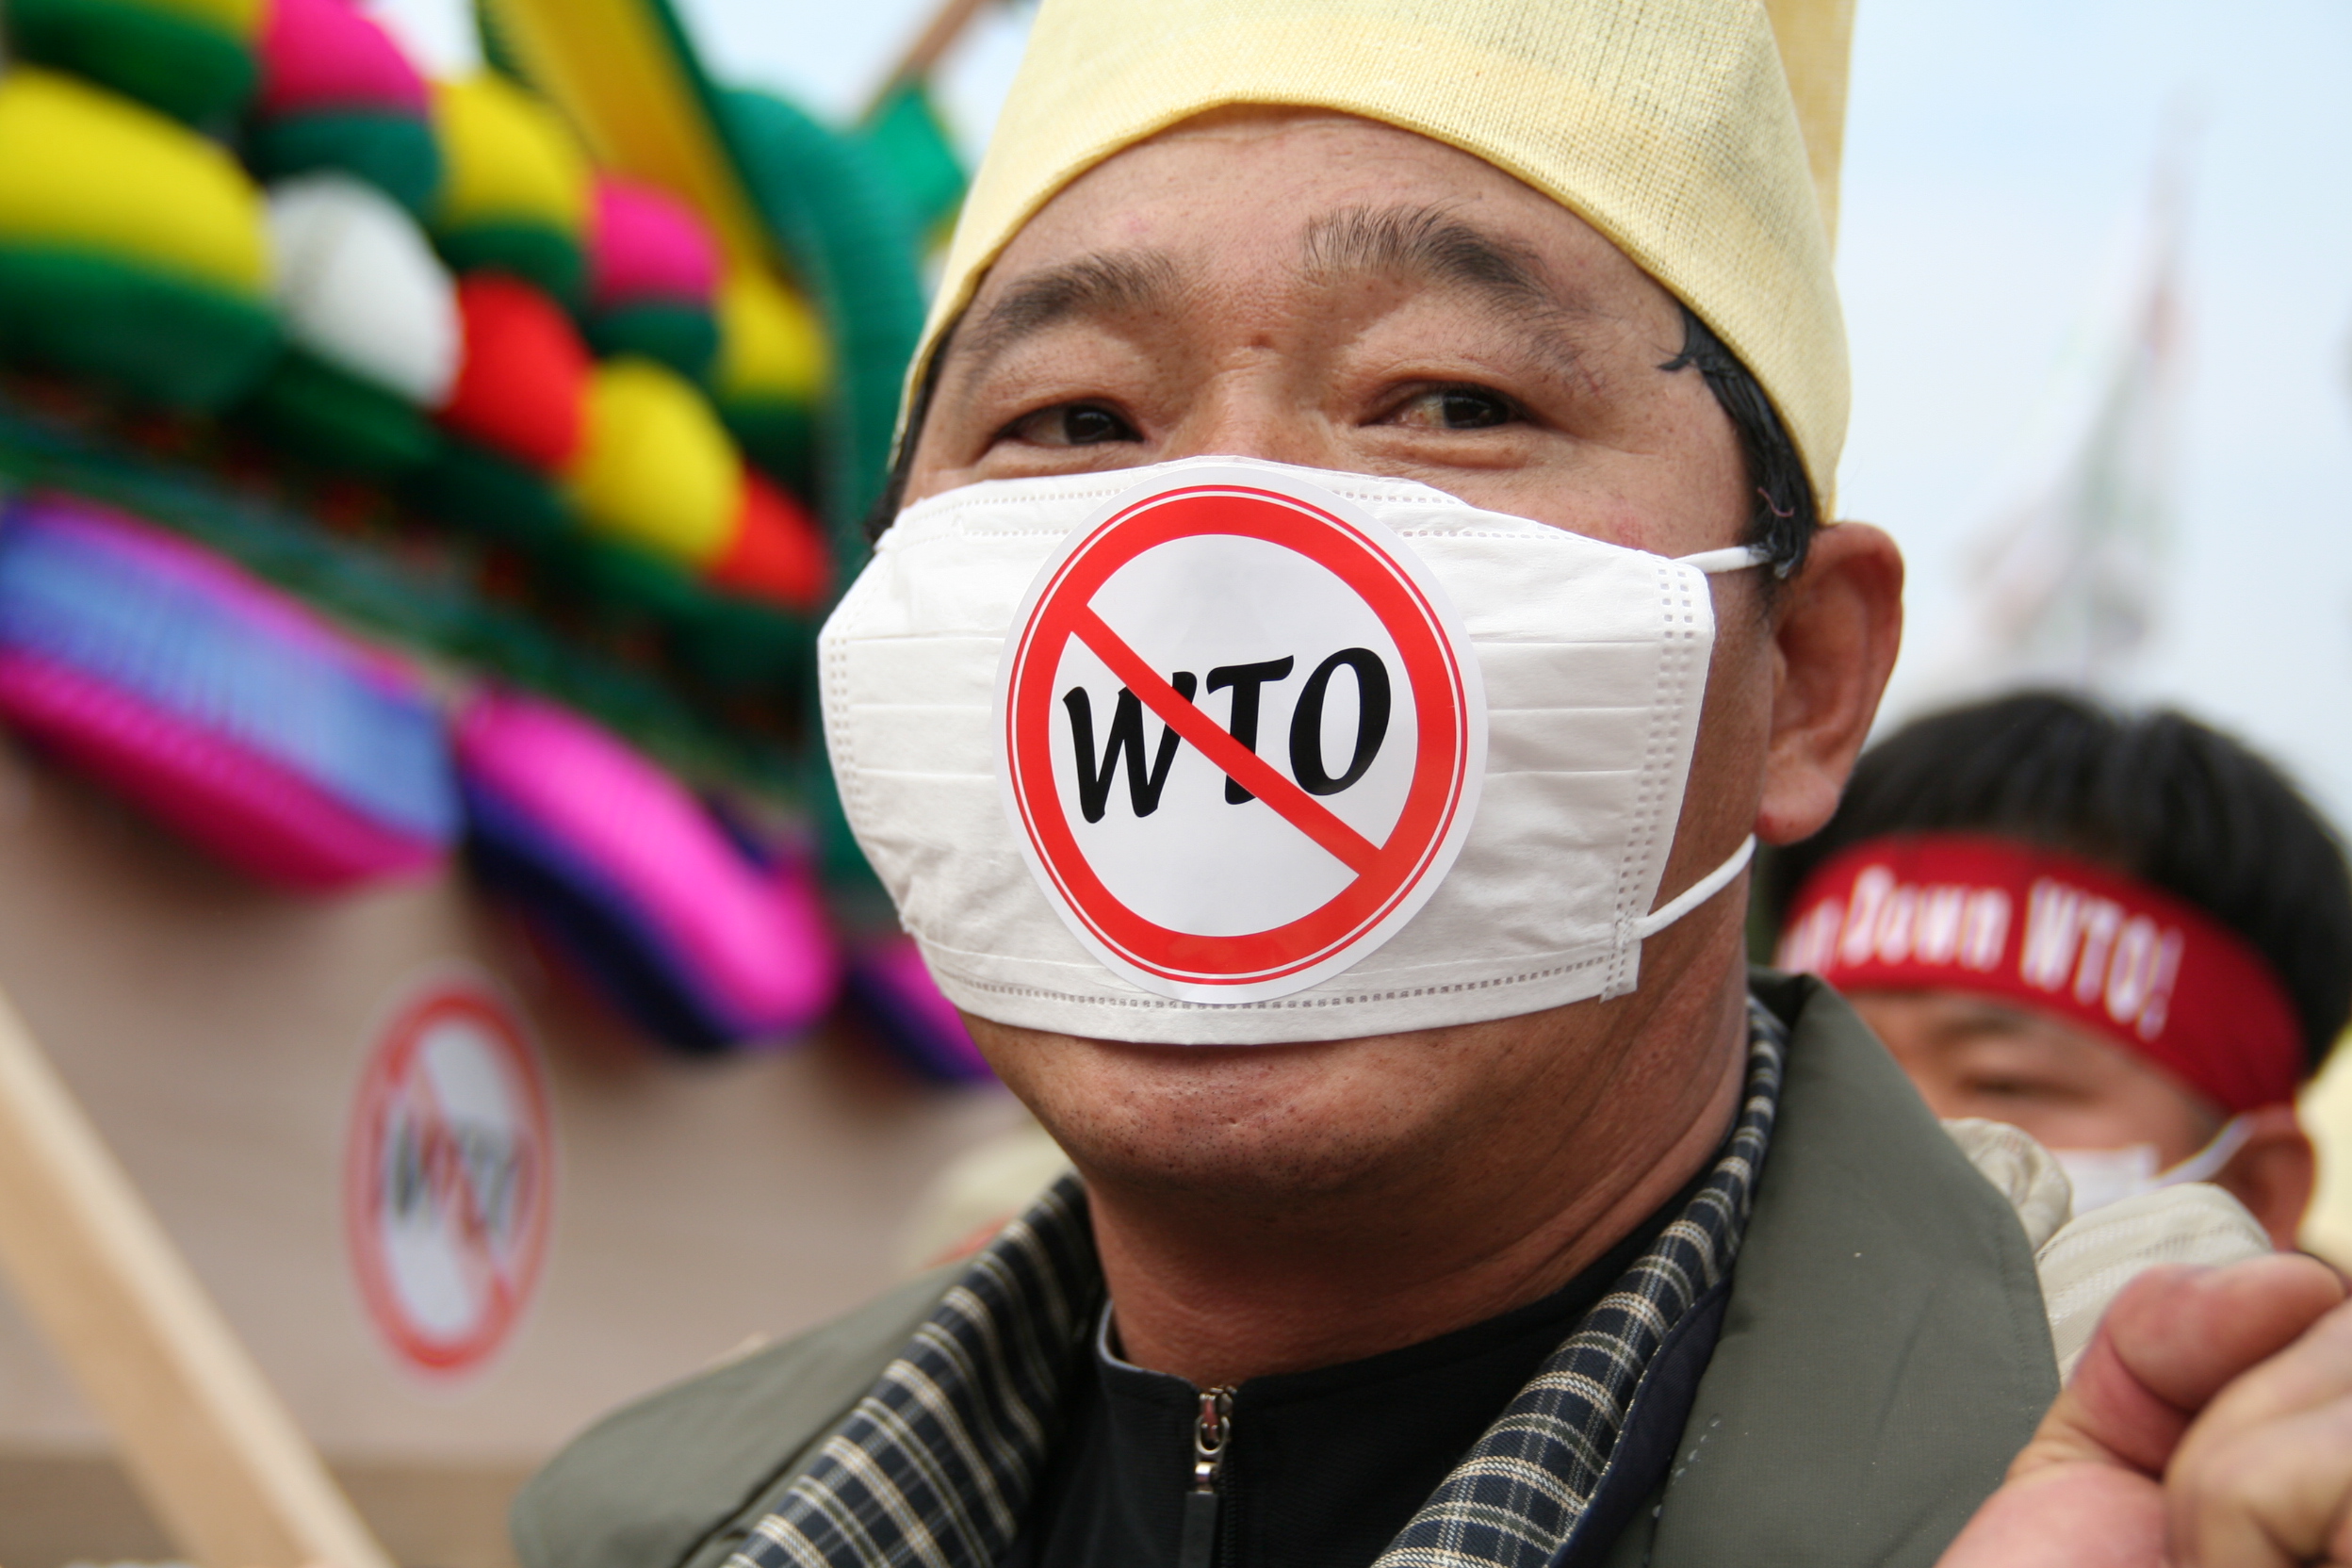 Chinese no to wto